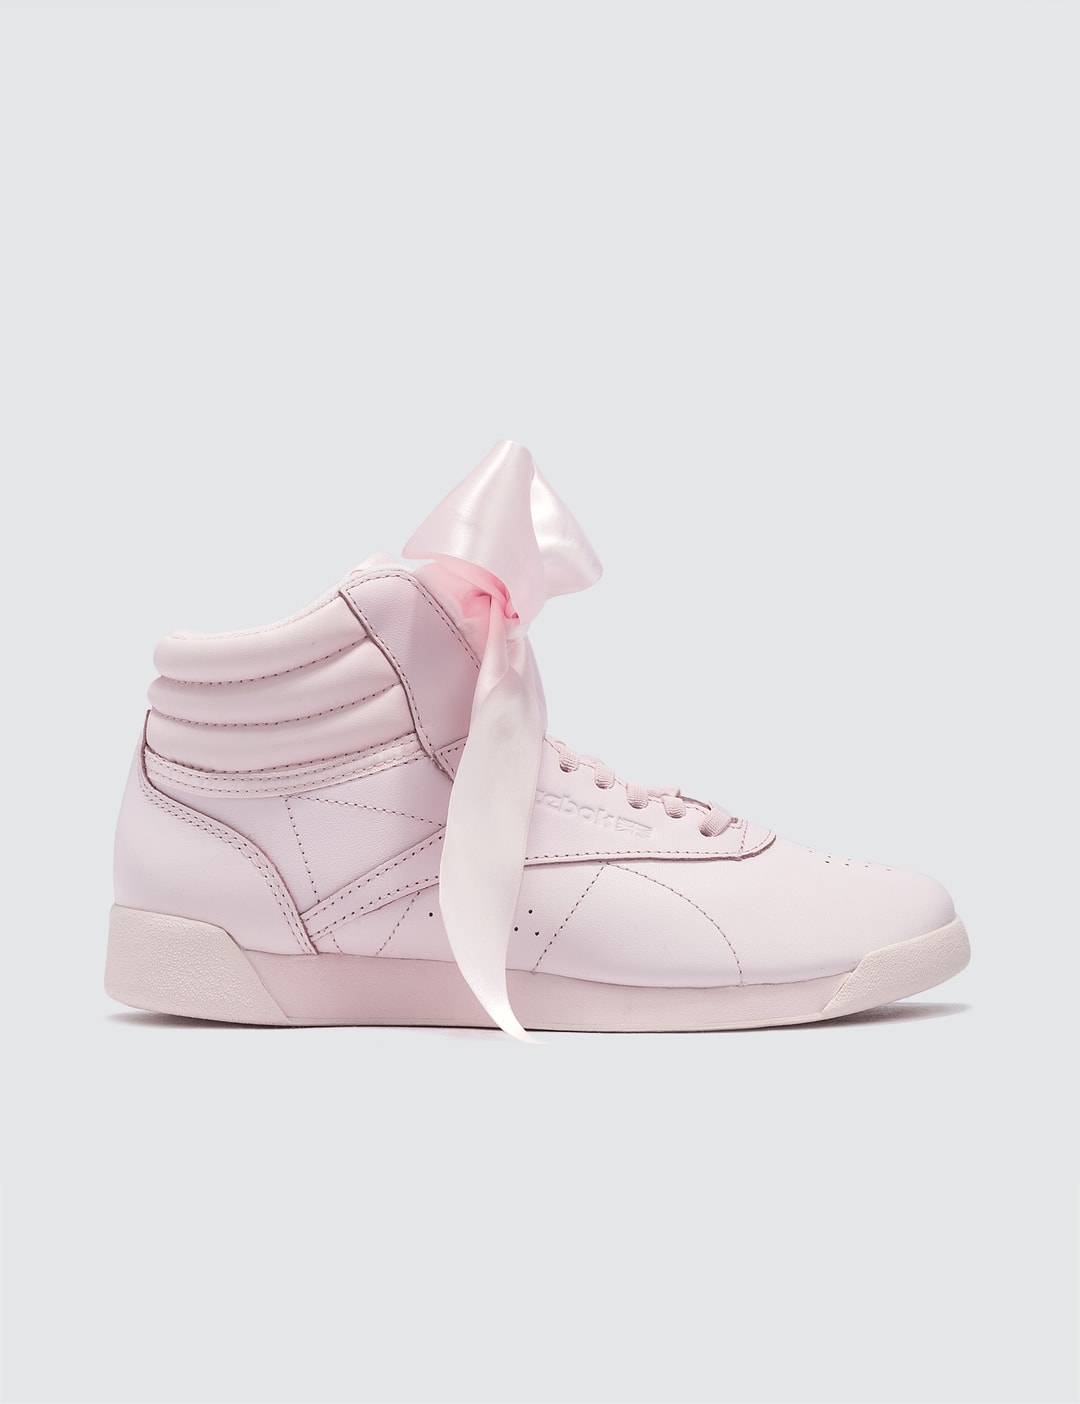 Kontoret fordøje servitrice Reebok - F/S Hi Satin Bow | HBX - Globally Curated Fashion and Lifestyle by  Hypebeast